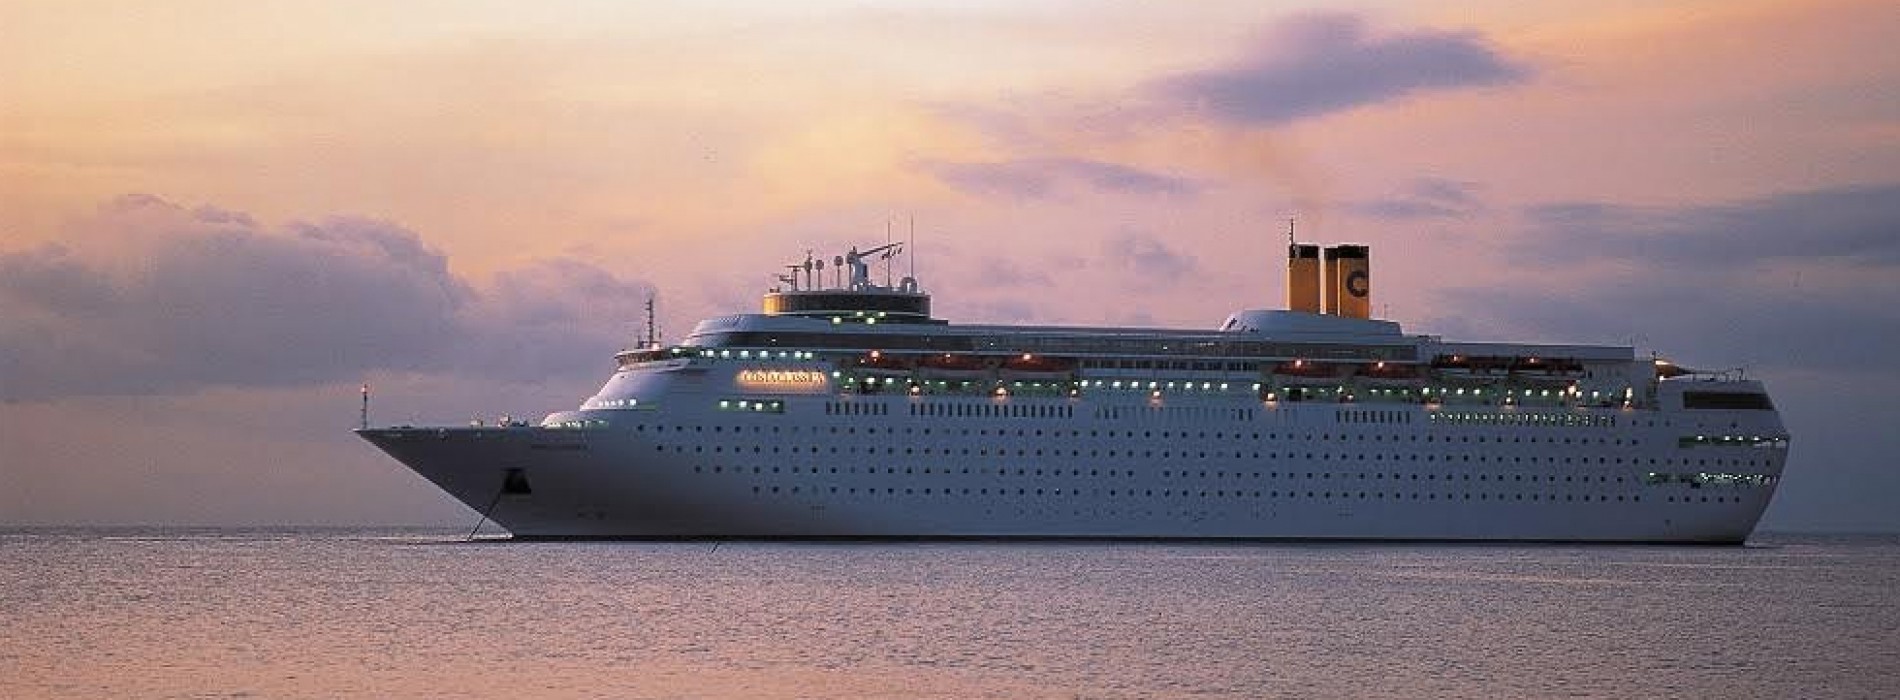 This December embark on the highly anticipated Mumbai-Maldives Cruise with Costa Neoclassica